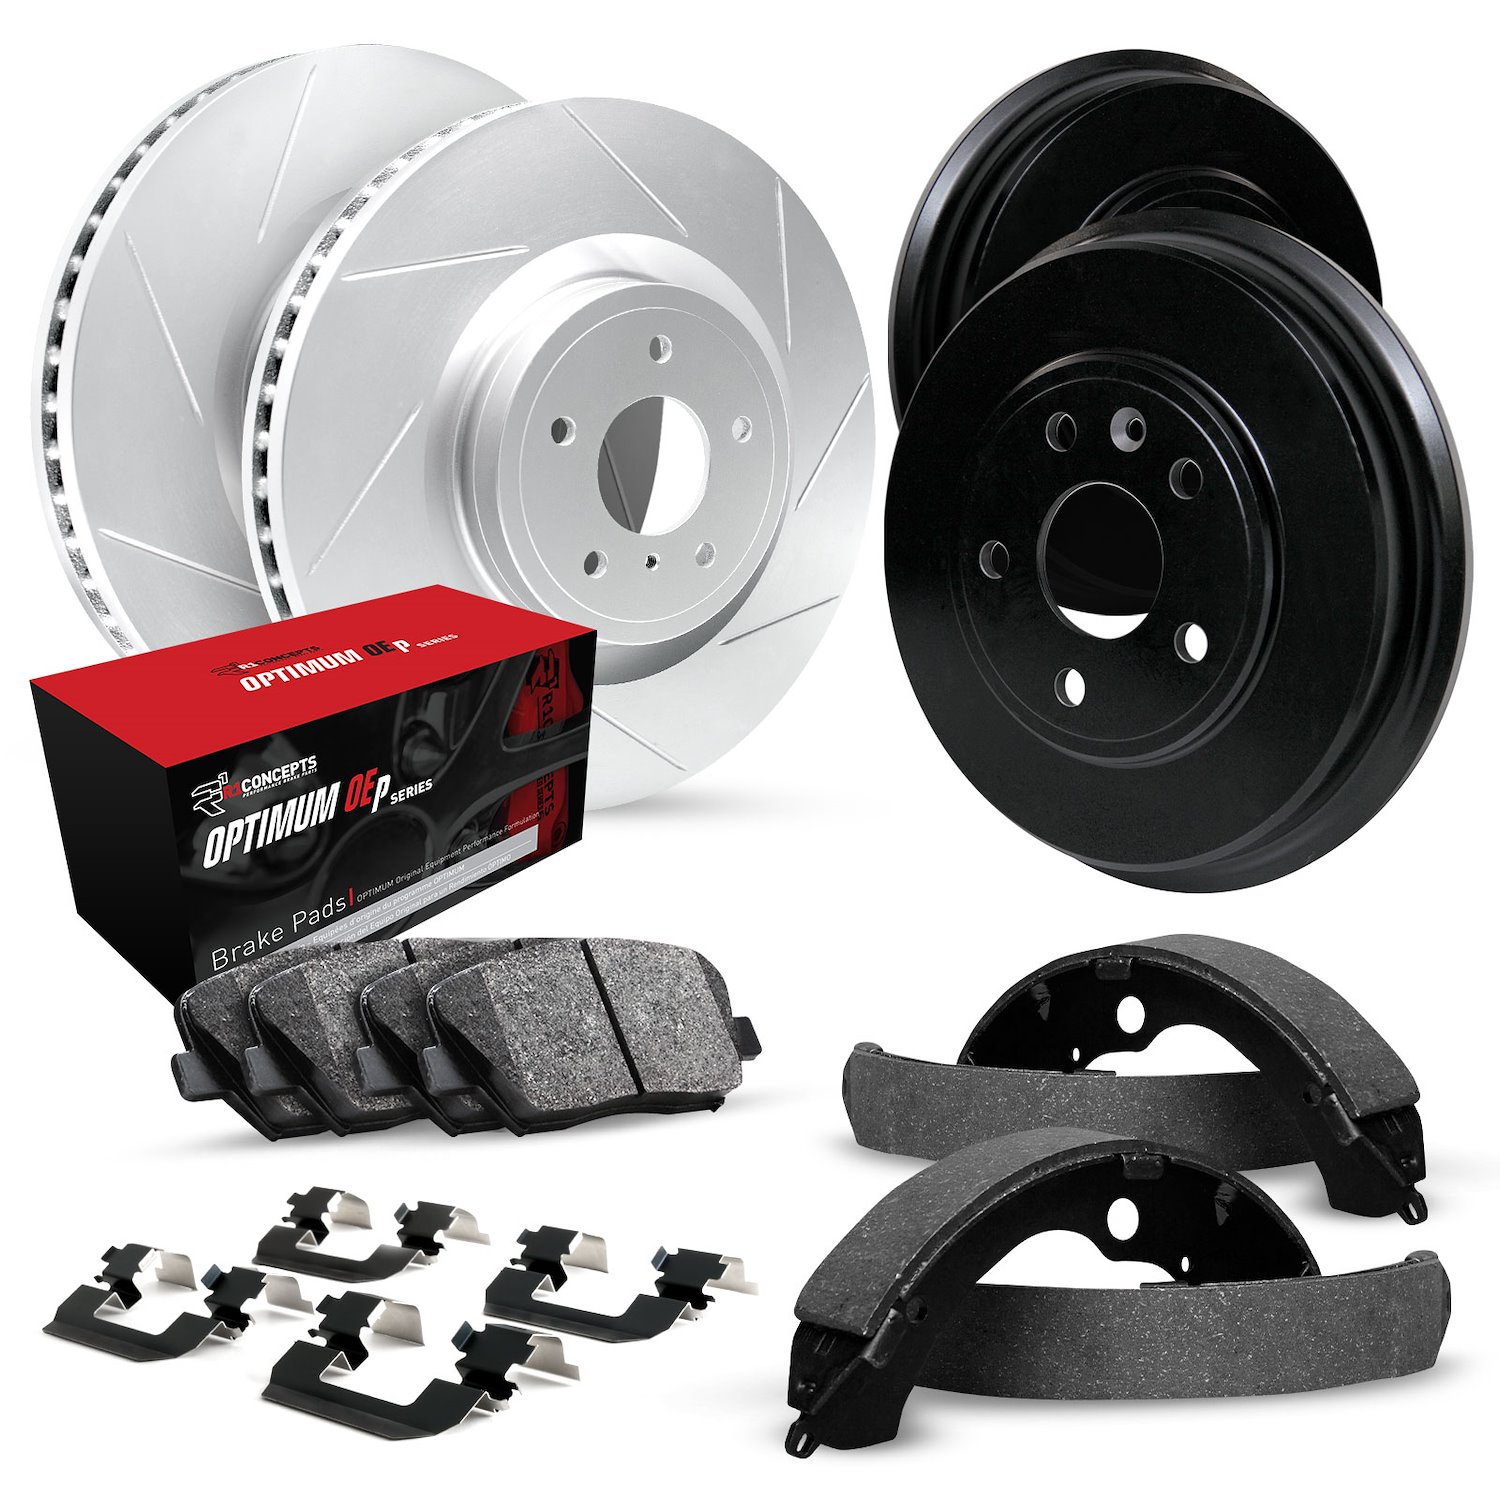 GEO-Carbon Slotted Brake Rotor & Drum Set w/Optimum OE Pads, Shoes, & Hardware, 2005-2008 GM, Position: Front & Rear